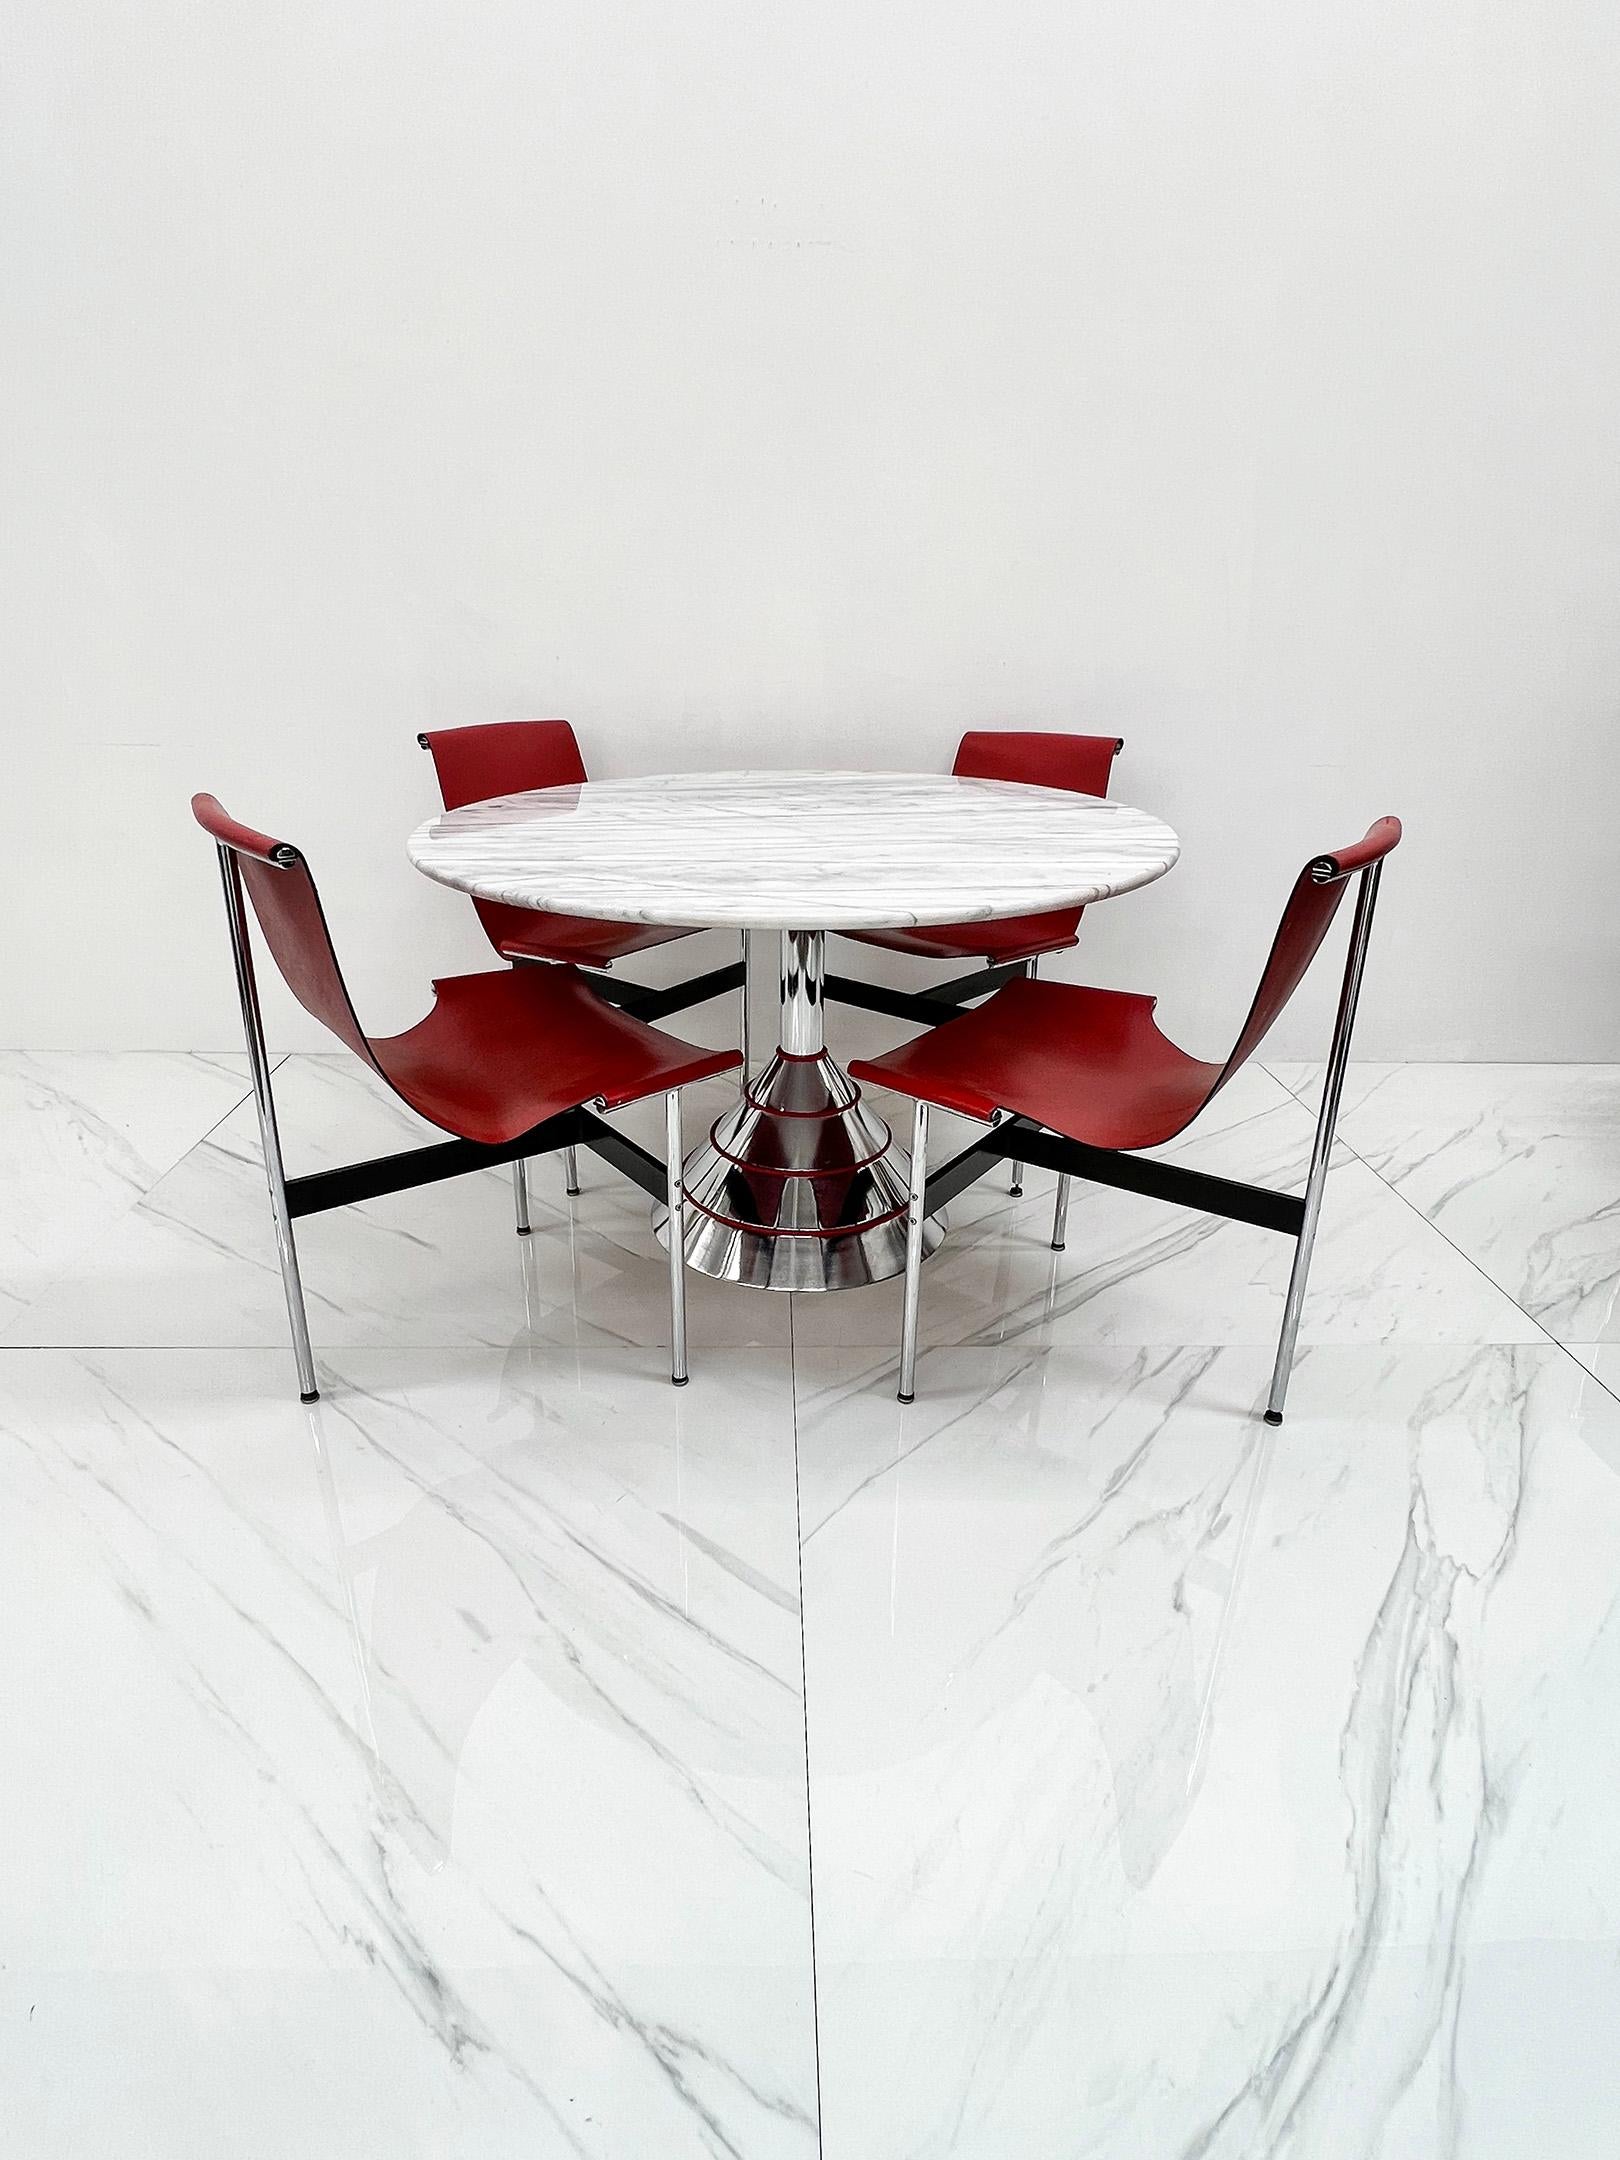 This dining table is stunning! A true masterpiece of Memphis Milano styling, drawing inspiration from the iconic designs of Ettore Sottsass, Vico Magistretti, and other members of the influential design collective. The table features a polished